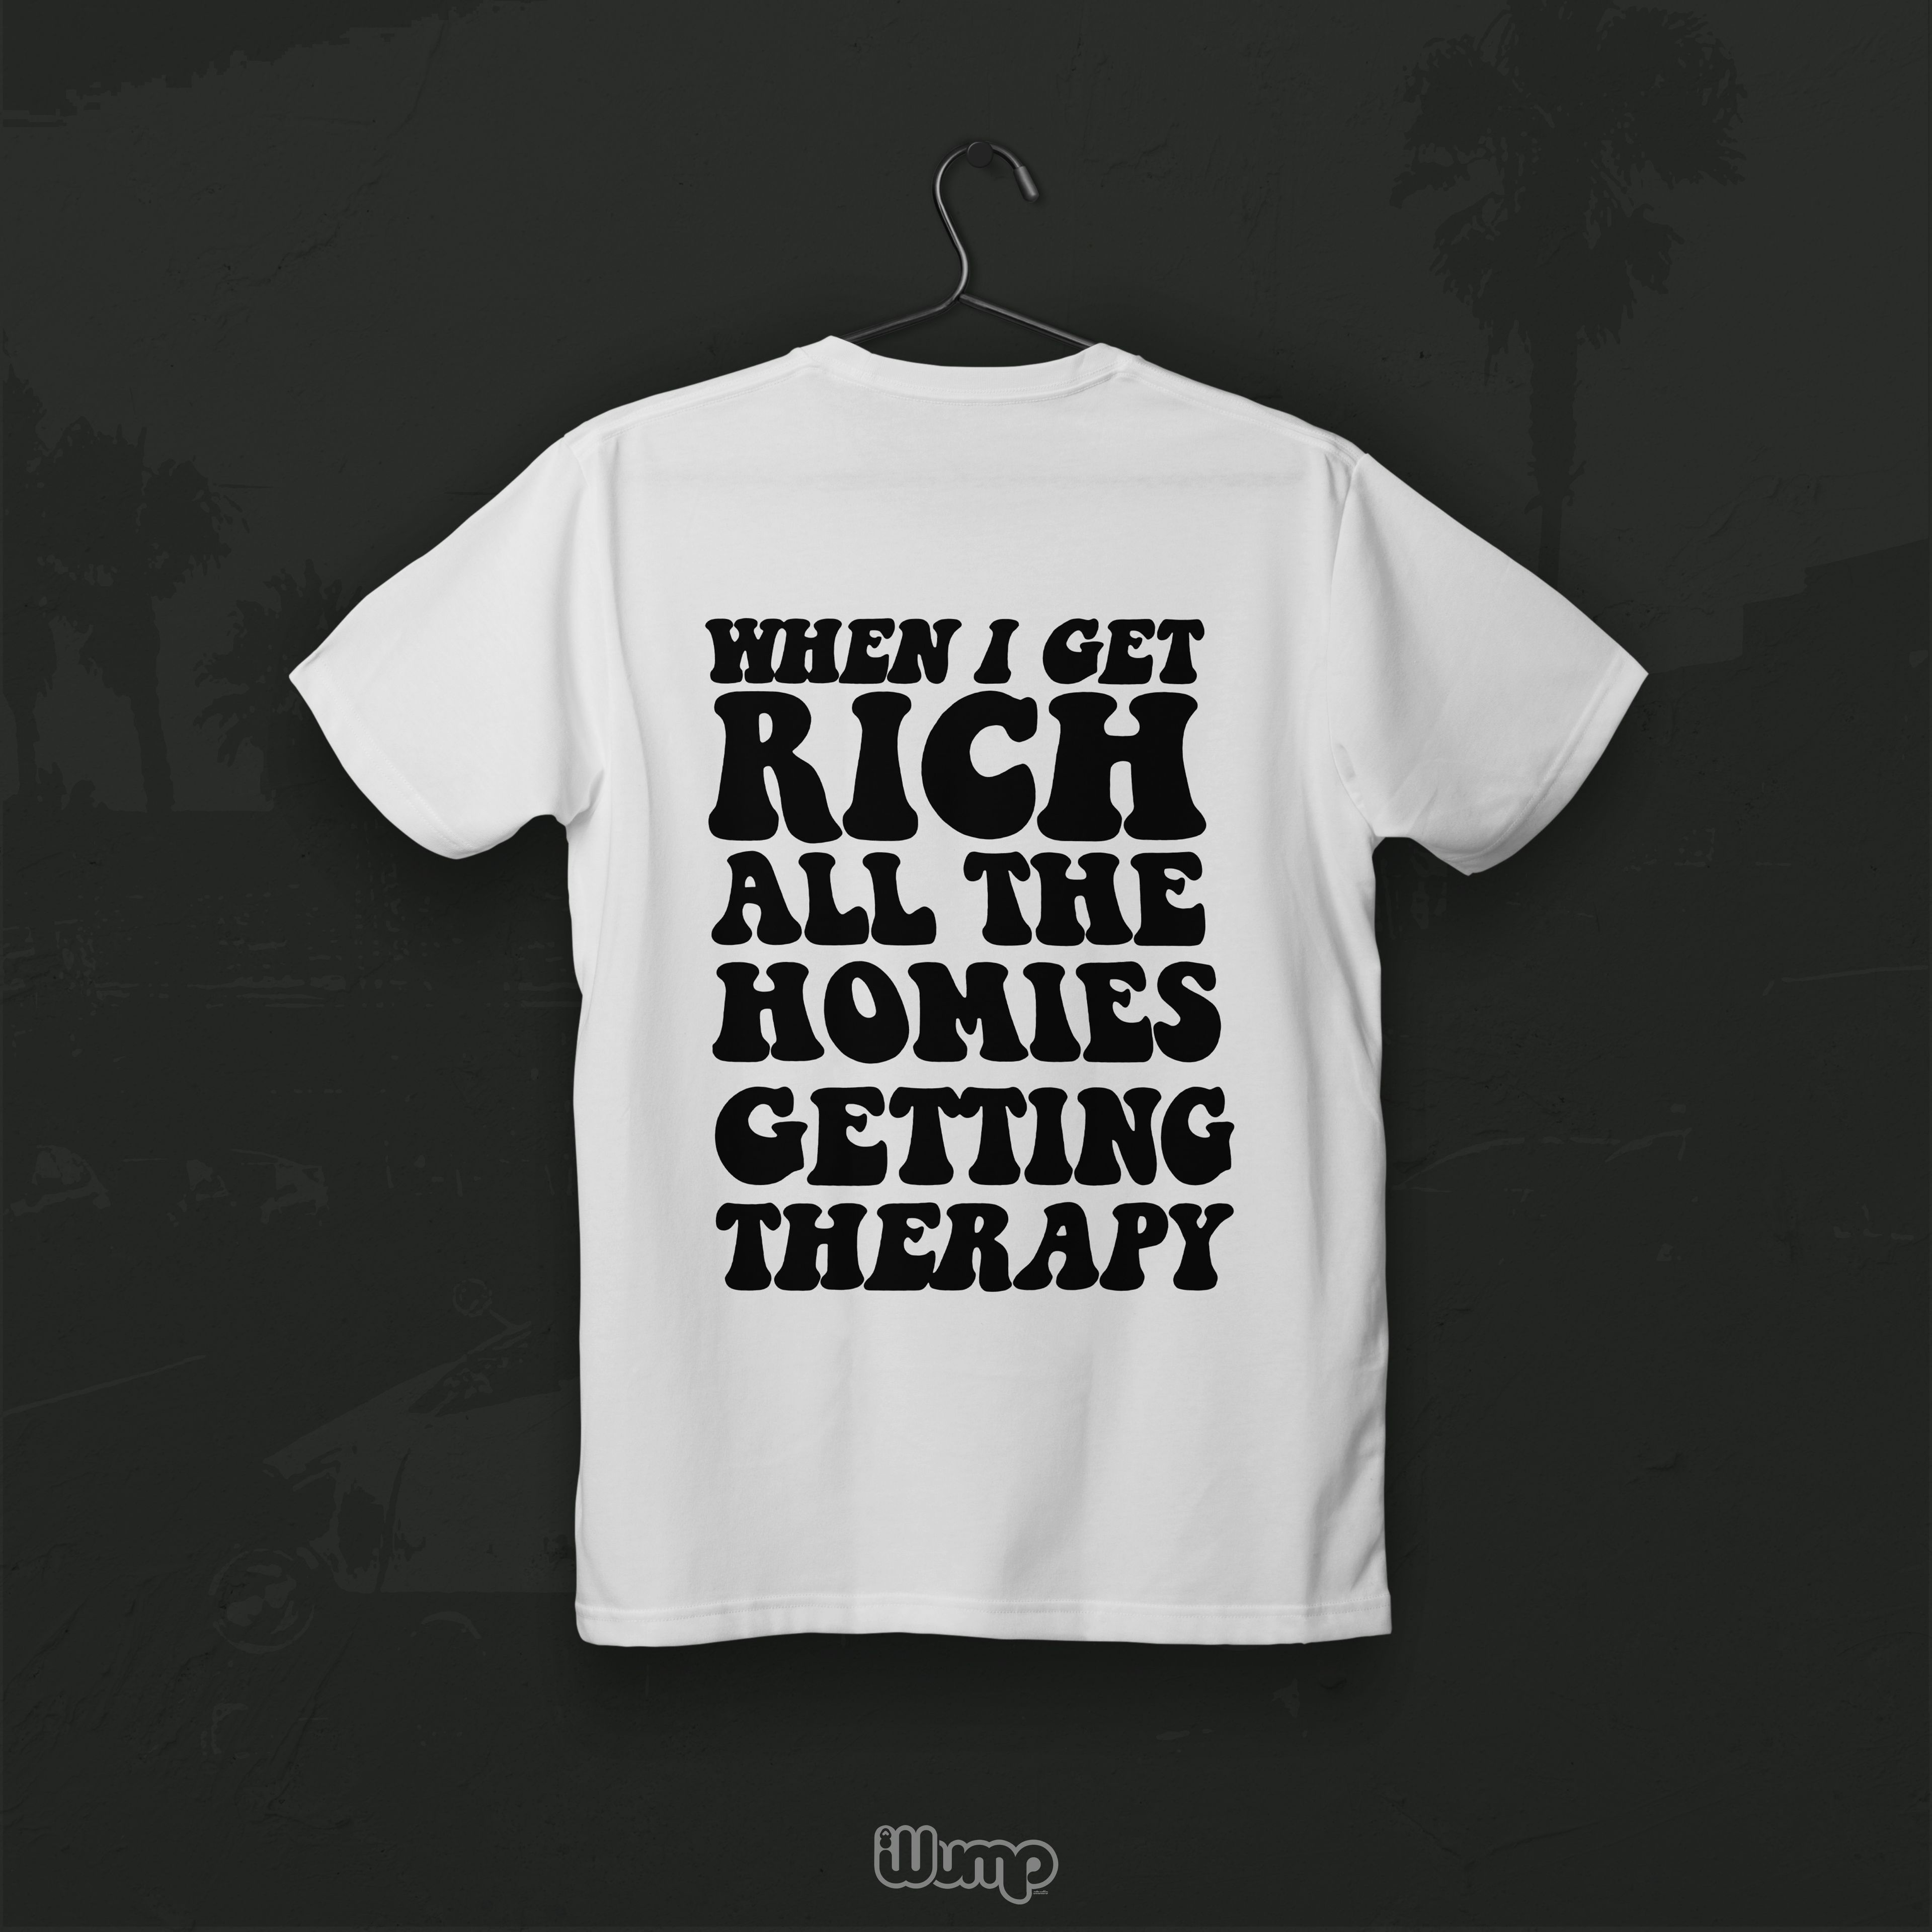 WHEN I GET RICH ALL MY HOMIES GETTING THERAPY T-SHIRT